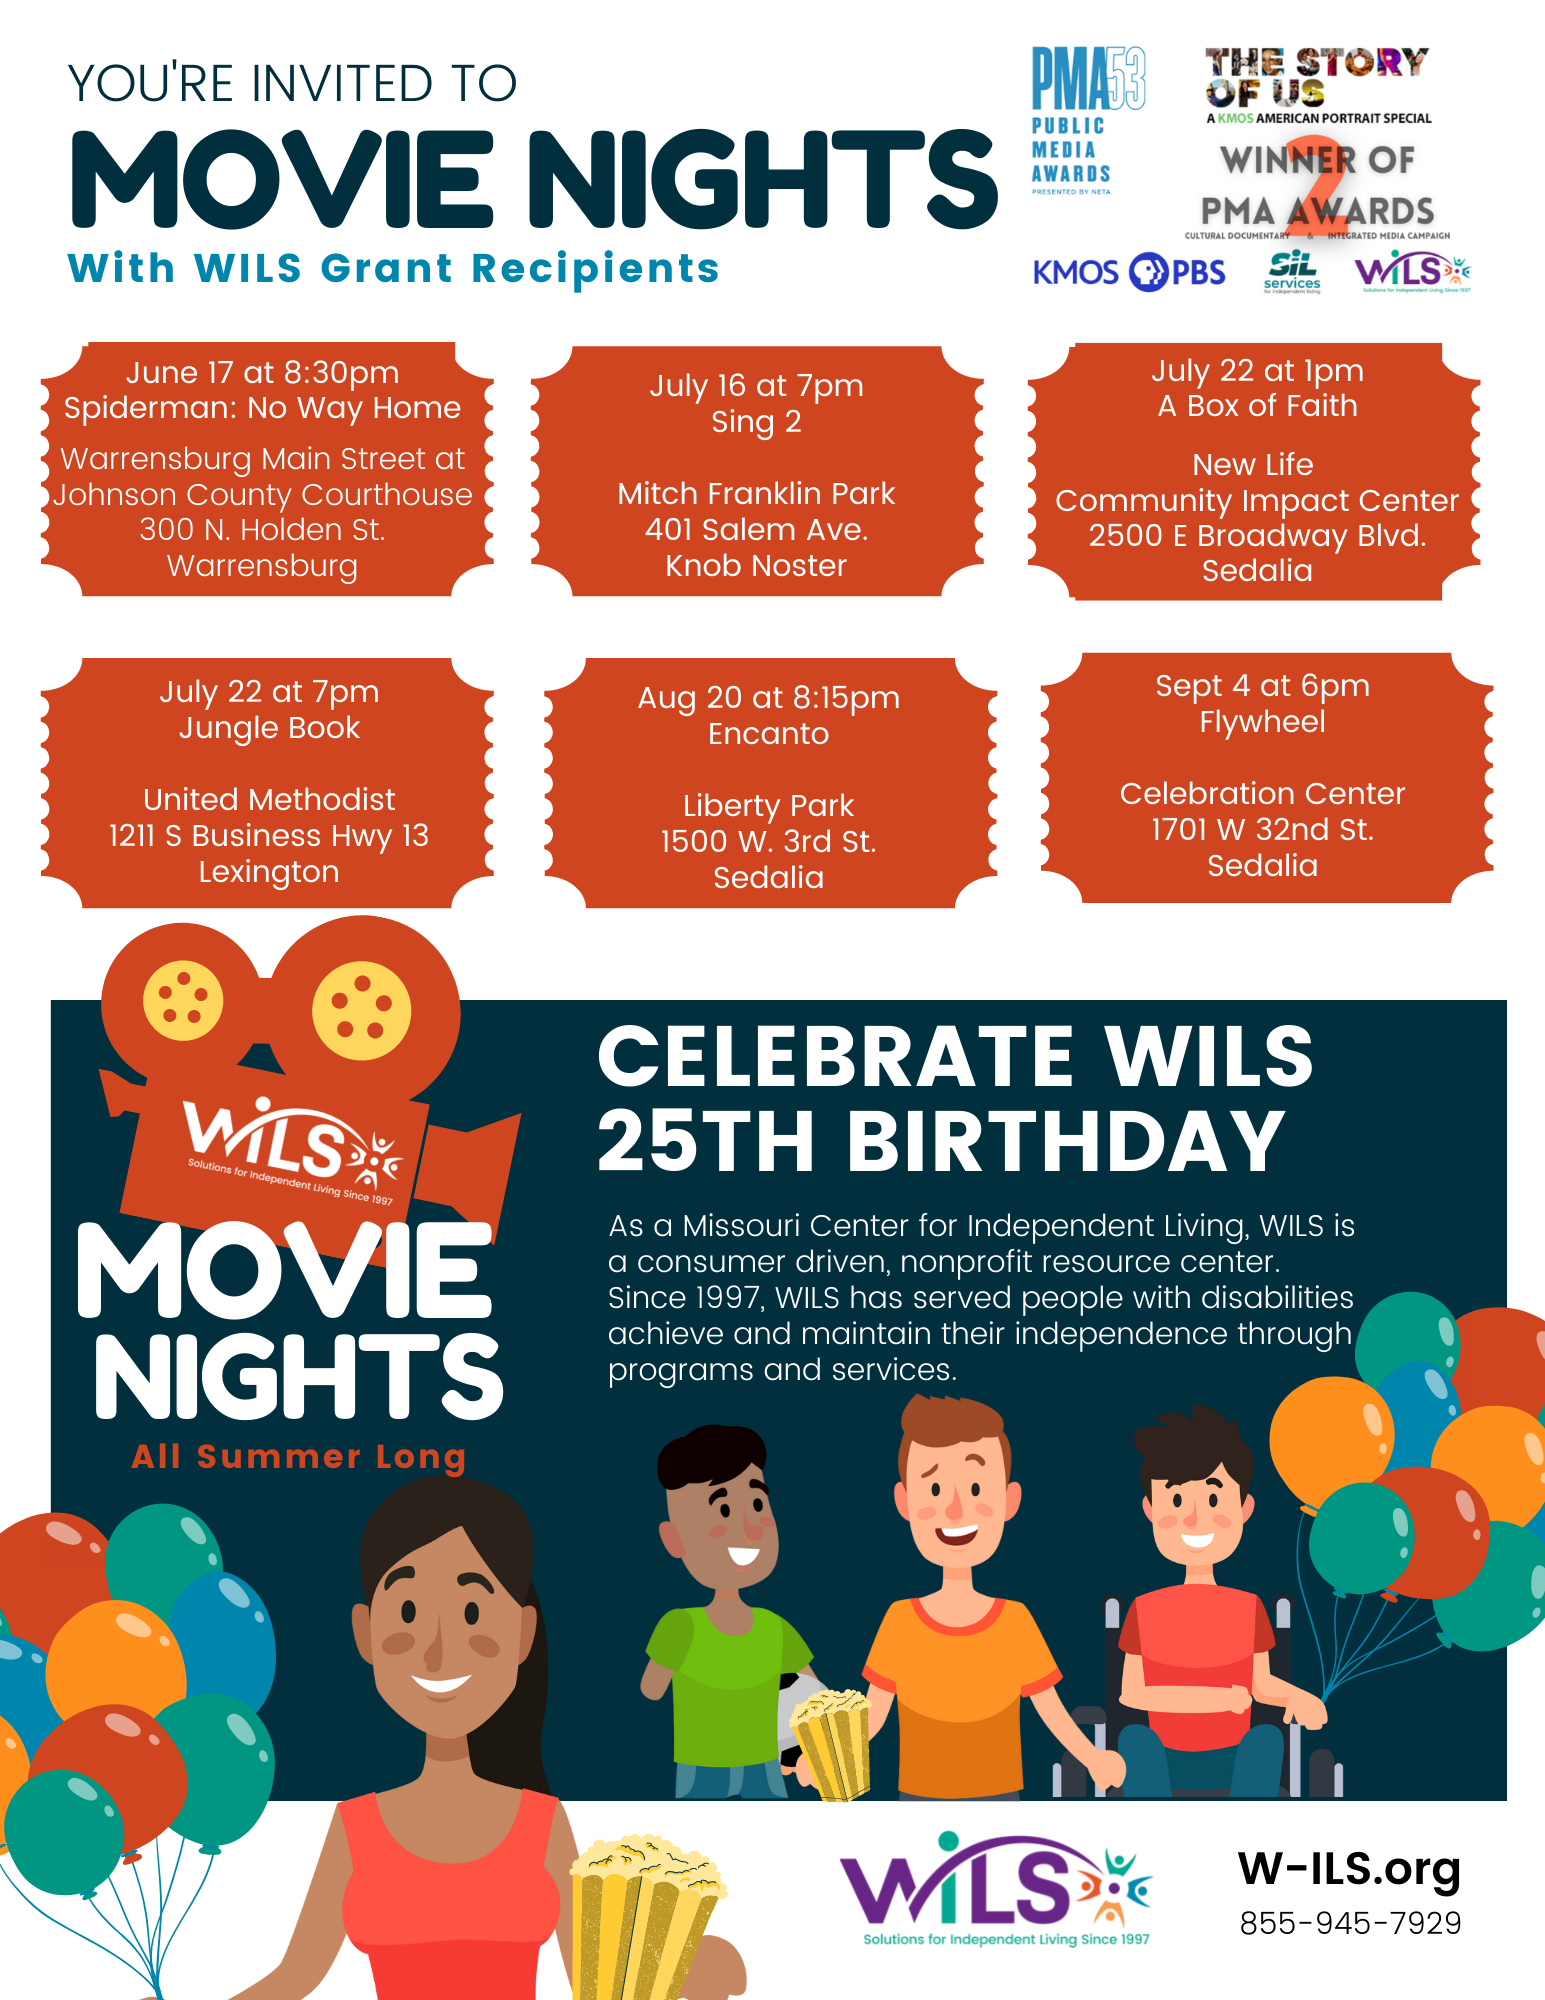 You're invited to movie events with WILS grant recipients. June 17 at 8:30pm Spiderman: No Way Home hosted by Warrensburg Main Street at Johnson County Courthouse 300 N. Holden St. Warrensburg. July 16 at 7pm Sing 2 plays at Mitch Franklin Park 401 Salem Ave. in Knob Noster. July 22 at 1pm A Box of Faith plays at New Life Community Impact Center on 2500 E Broadway Blvd. in Sedalia. July 22 at 7pm Jungle Book hosted by United Methodist at 1211 S Business Hwy 13 in Lexington. Aug 20 at 8:15pm Encanto plays at Liberty Park 1500 W. 3rd St. in Sedalia. Sept 4 at 6pm Flywheel will be shown at the Celebration Center at 1701 W 32nd St. in Sedalia. As a Missouri Center for Independent Living, WILS is a consumer driven, nonprofit resource center. Since 1997, WILS has served people with disabilities achieve and maintain their independence through programs and services.